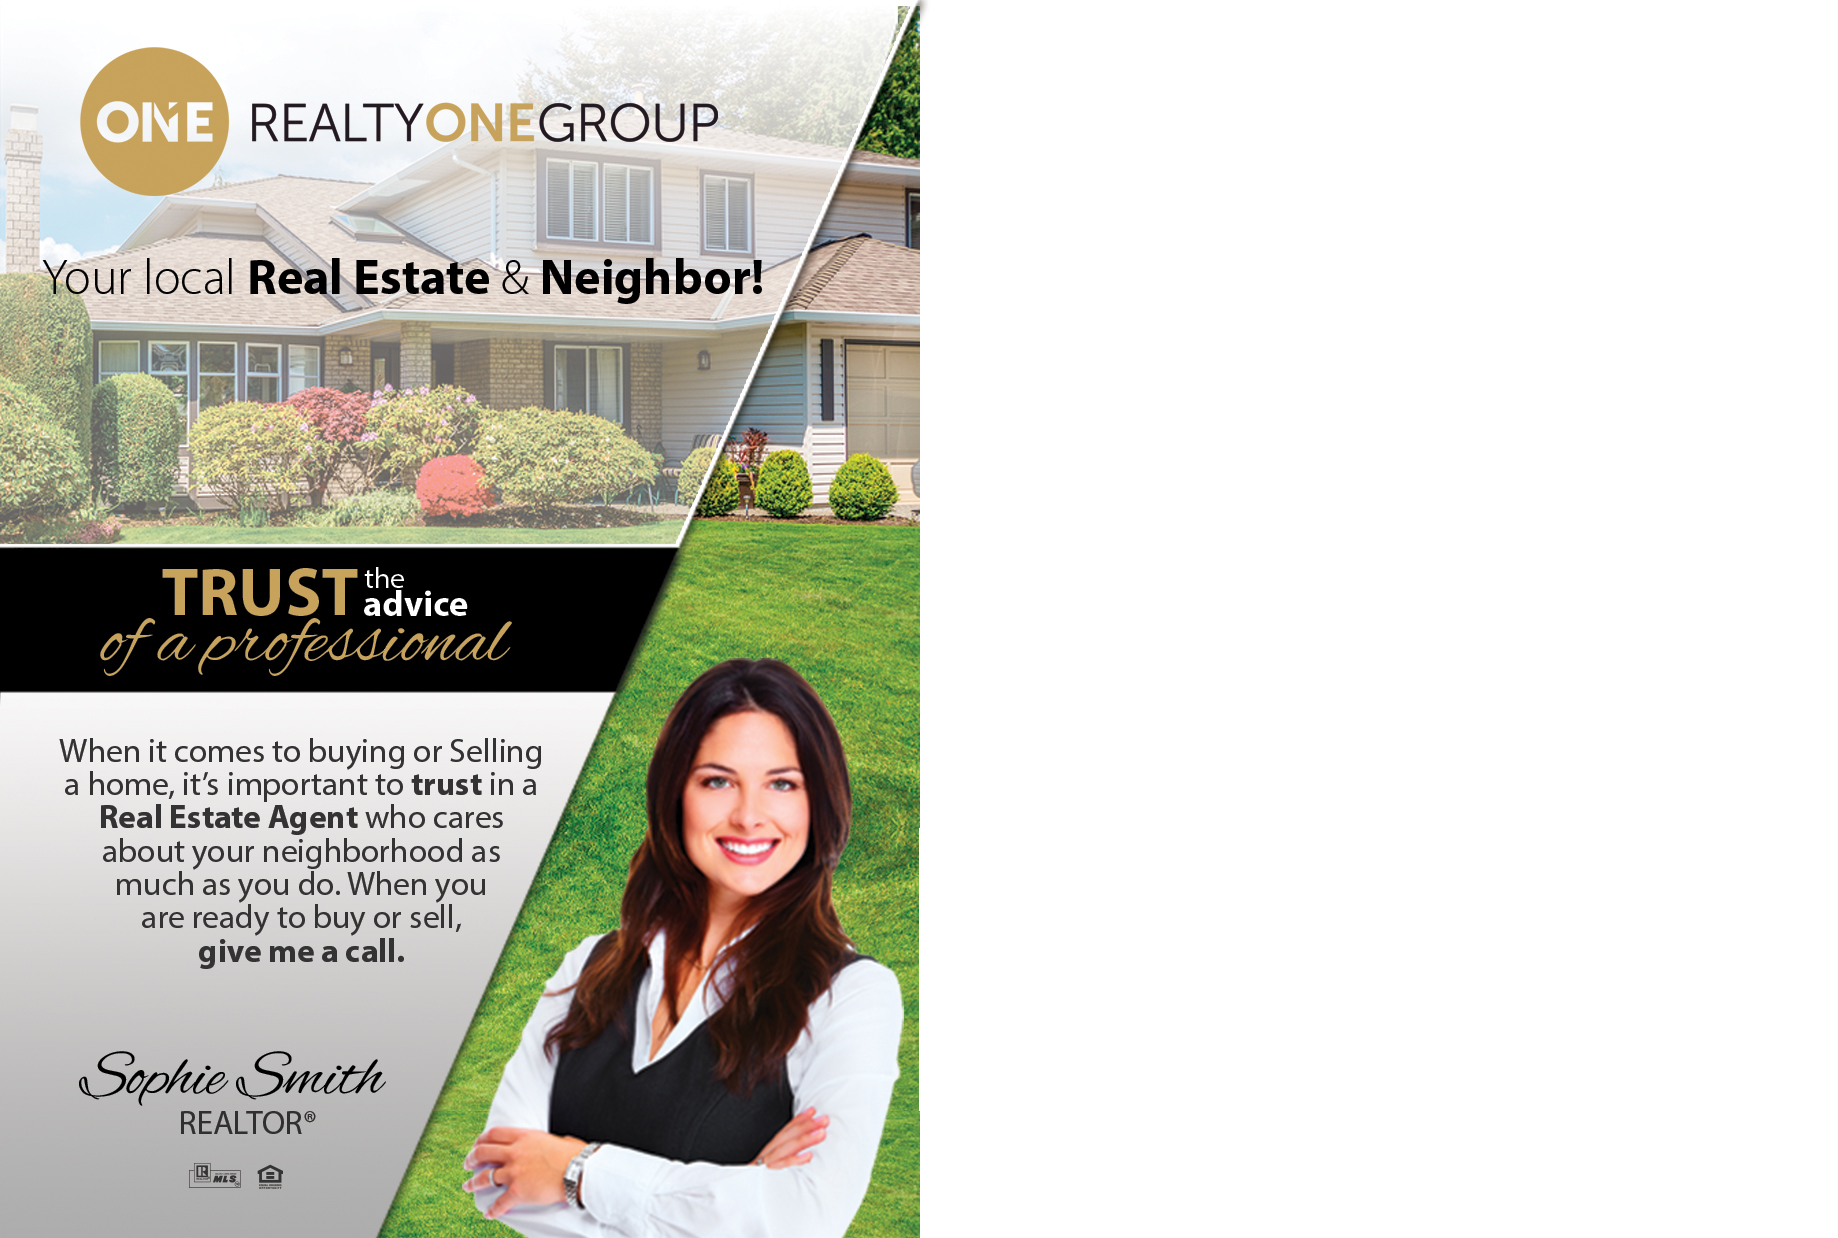 Realty One Group Realtor Cards, Realty One Group Agent Cards, Realty One Group Office Cards, Realty One Group Broker Cards